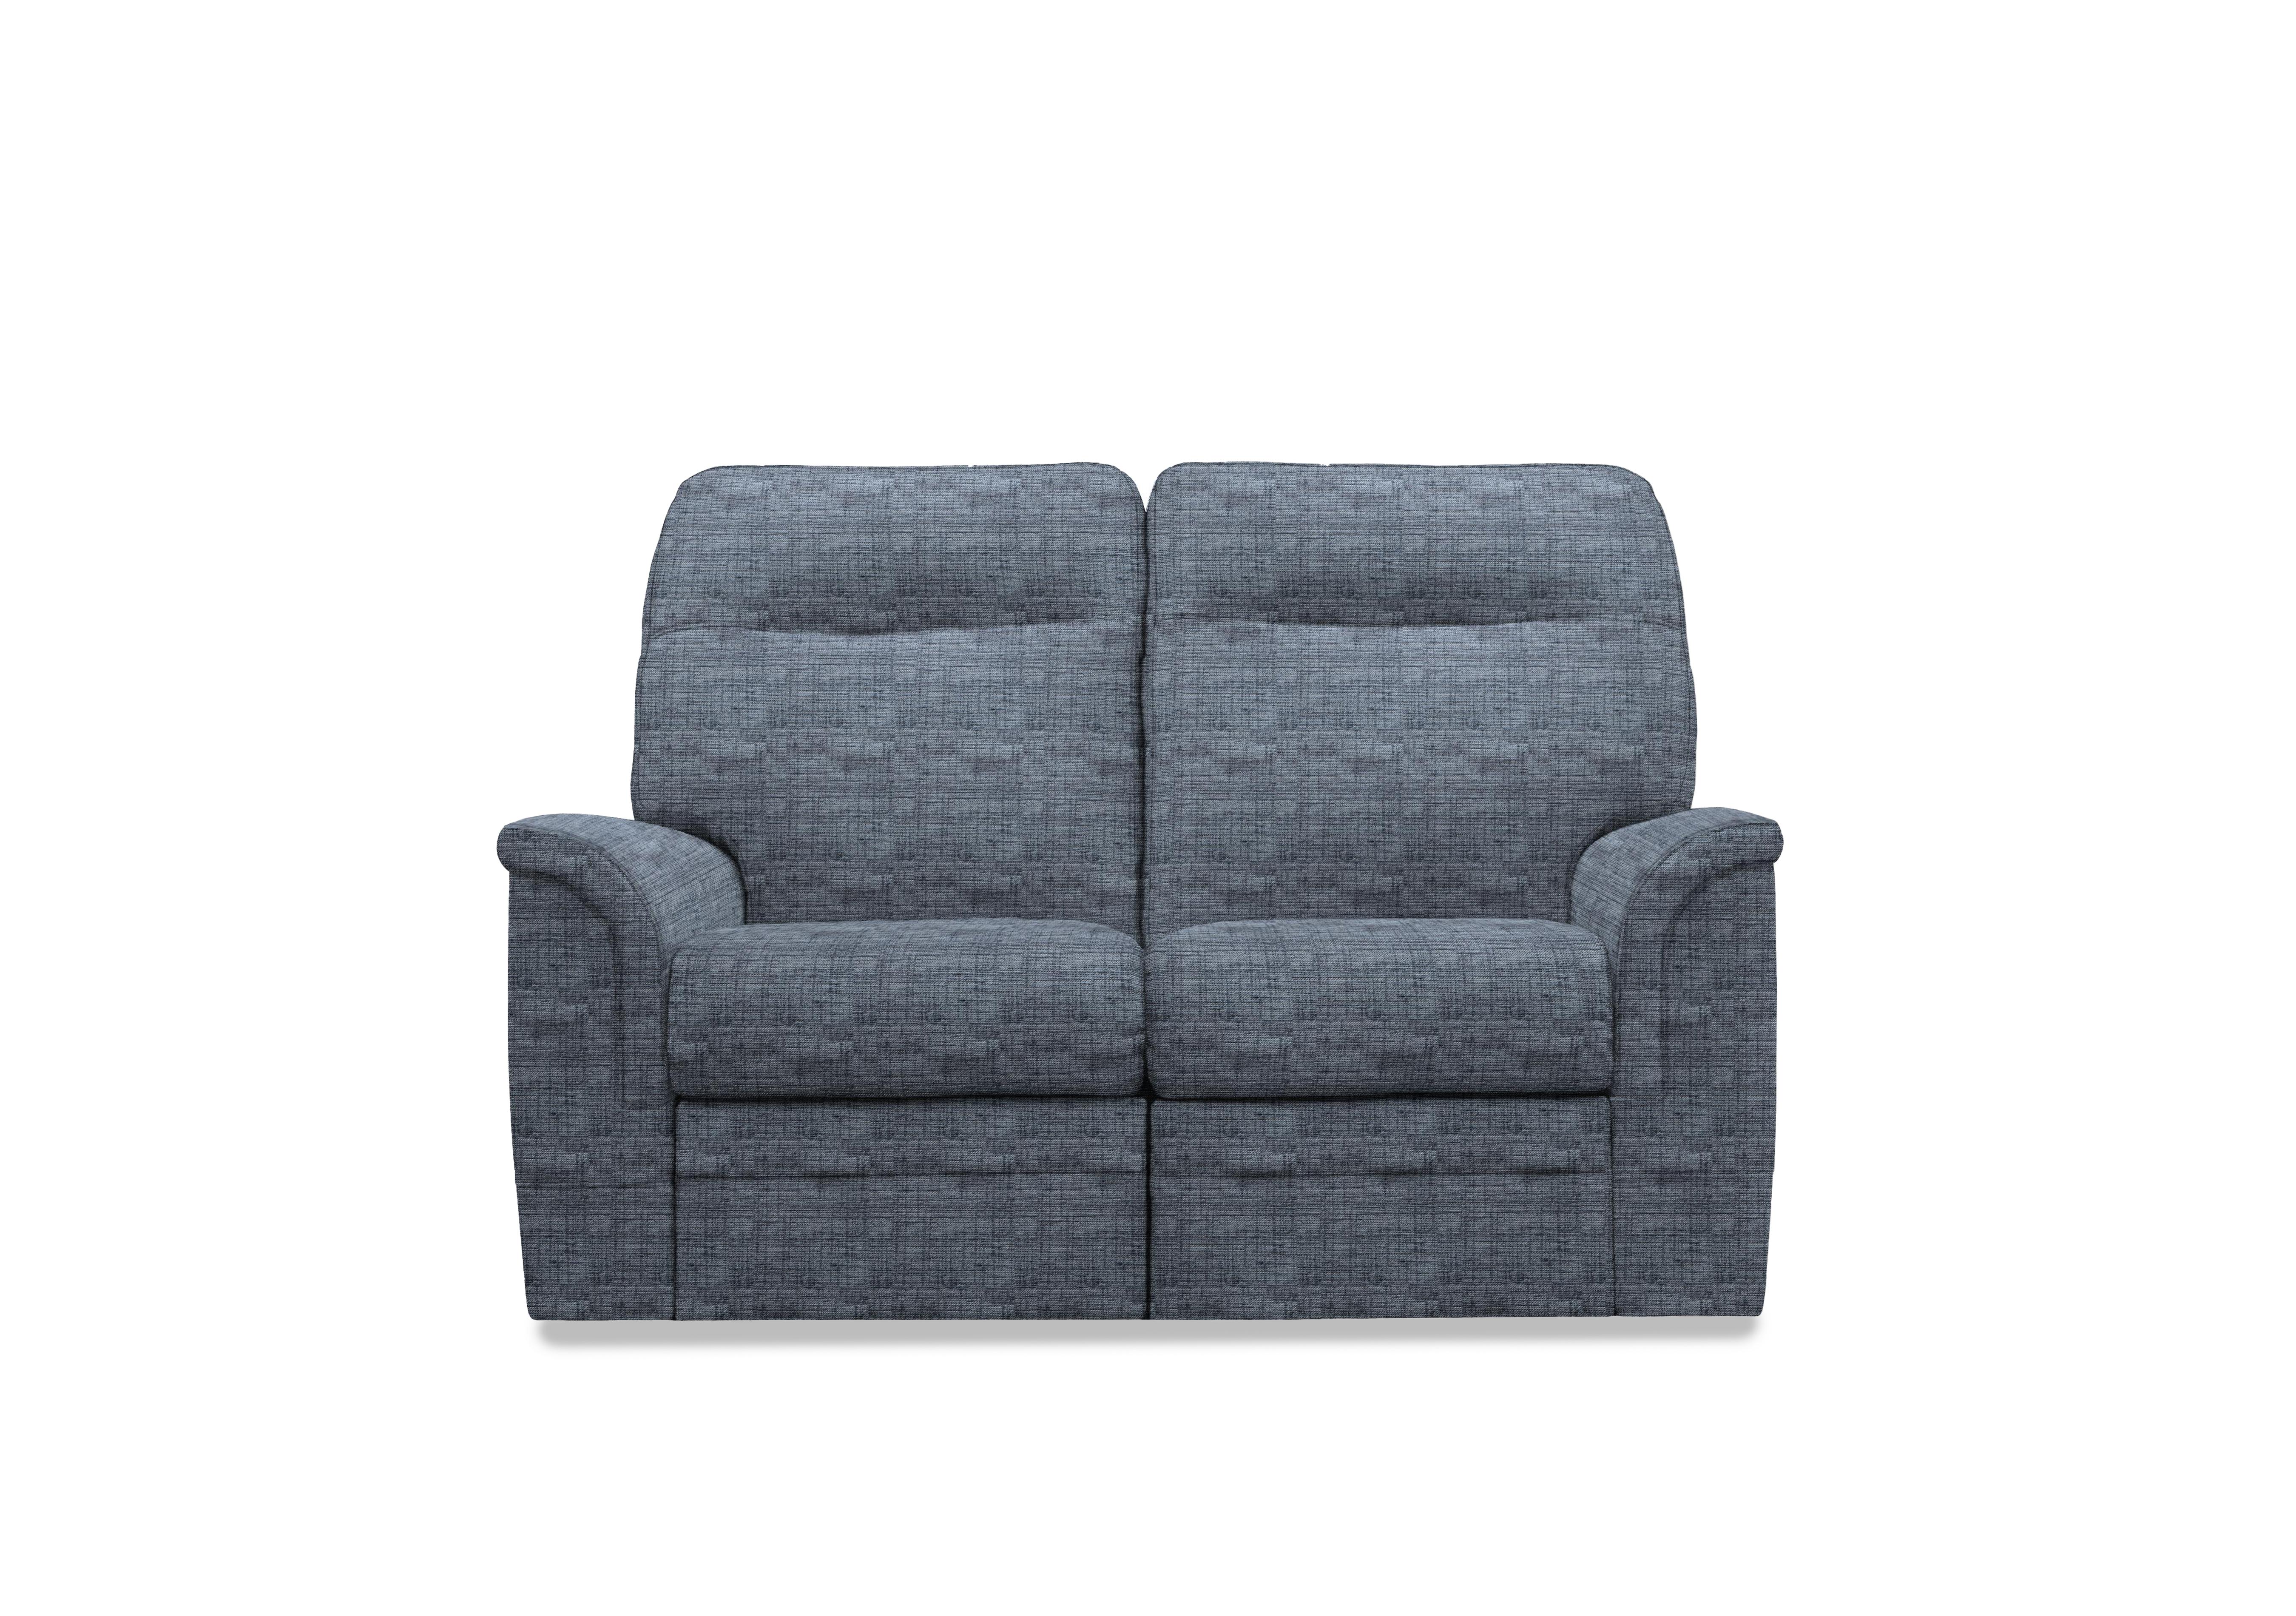 Hudson 23 Fabric 2 Seater Power Recliner Sofa with Power Headrests and Power Lumbar in Dash Blue 001497-0080 on Furniture Village